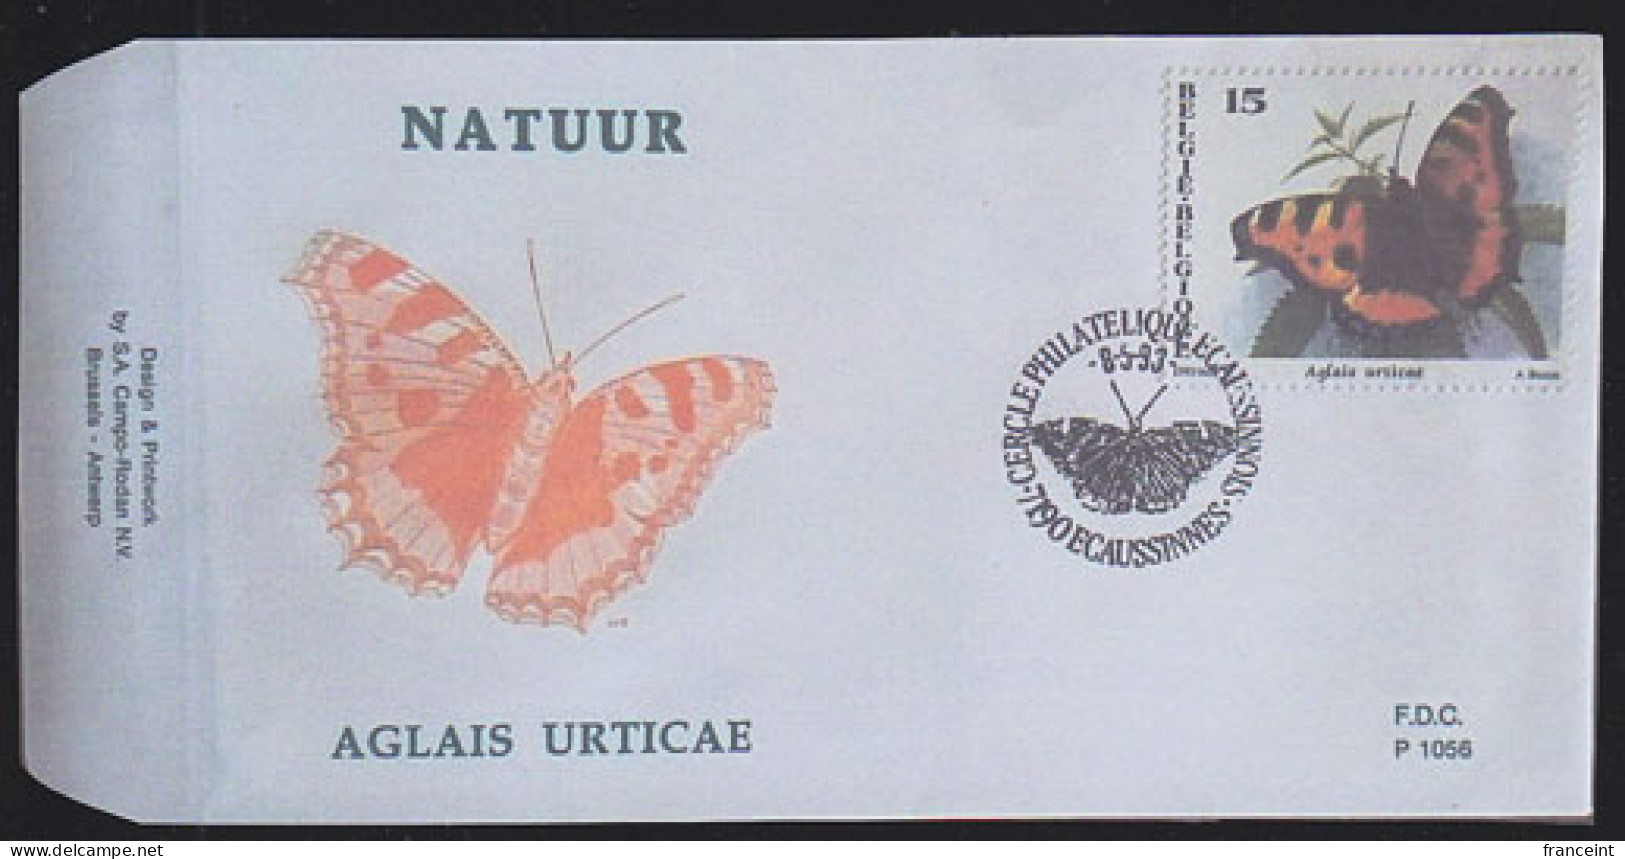 BELGIUM(1993) Small Tortoiseshell (Aglais Urticae). Die Proof In Bluish-green Signed By The Engraver. Scott No 1488. - Proofs & Reprints